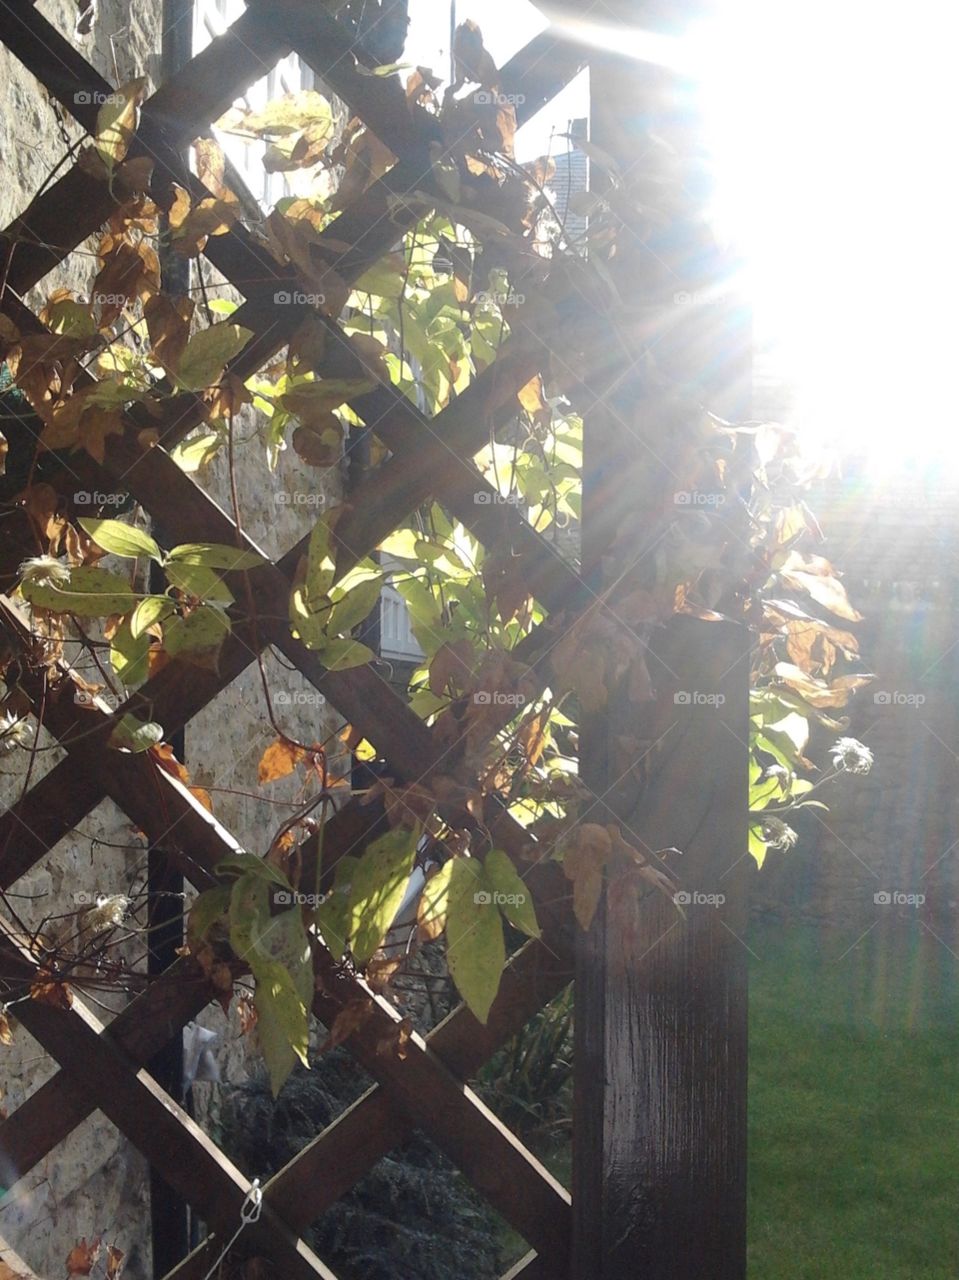 Garden trellis with late summer leaves, late afternoon sunshine in the garden with sun flair.